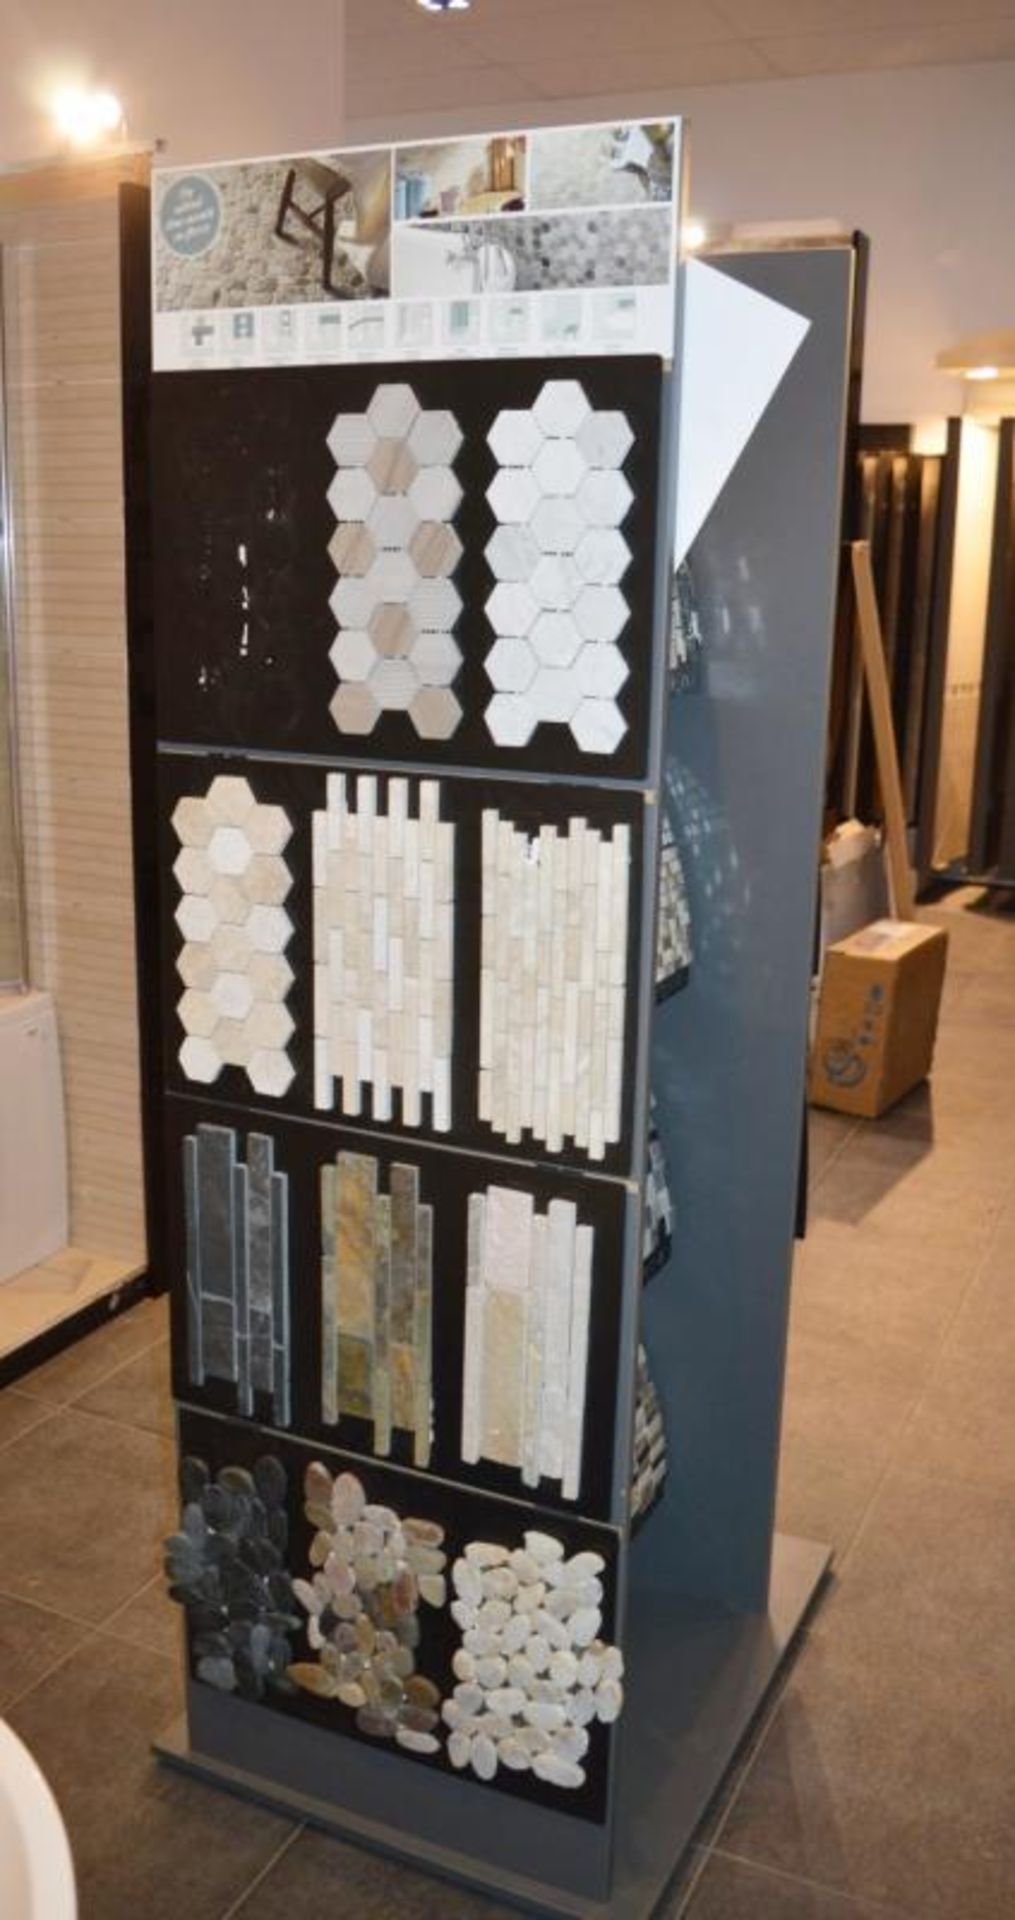 1 x Verona Tile Display Unit With Sample Stock - H184 x W84 x D65 cms - CL406 - Ref H226 - Ex - Image 10 of 11